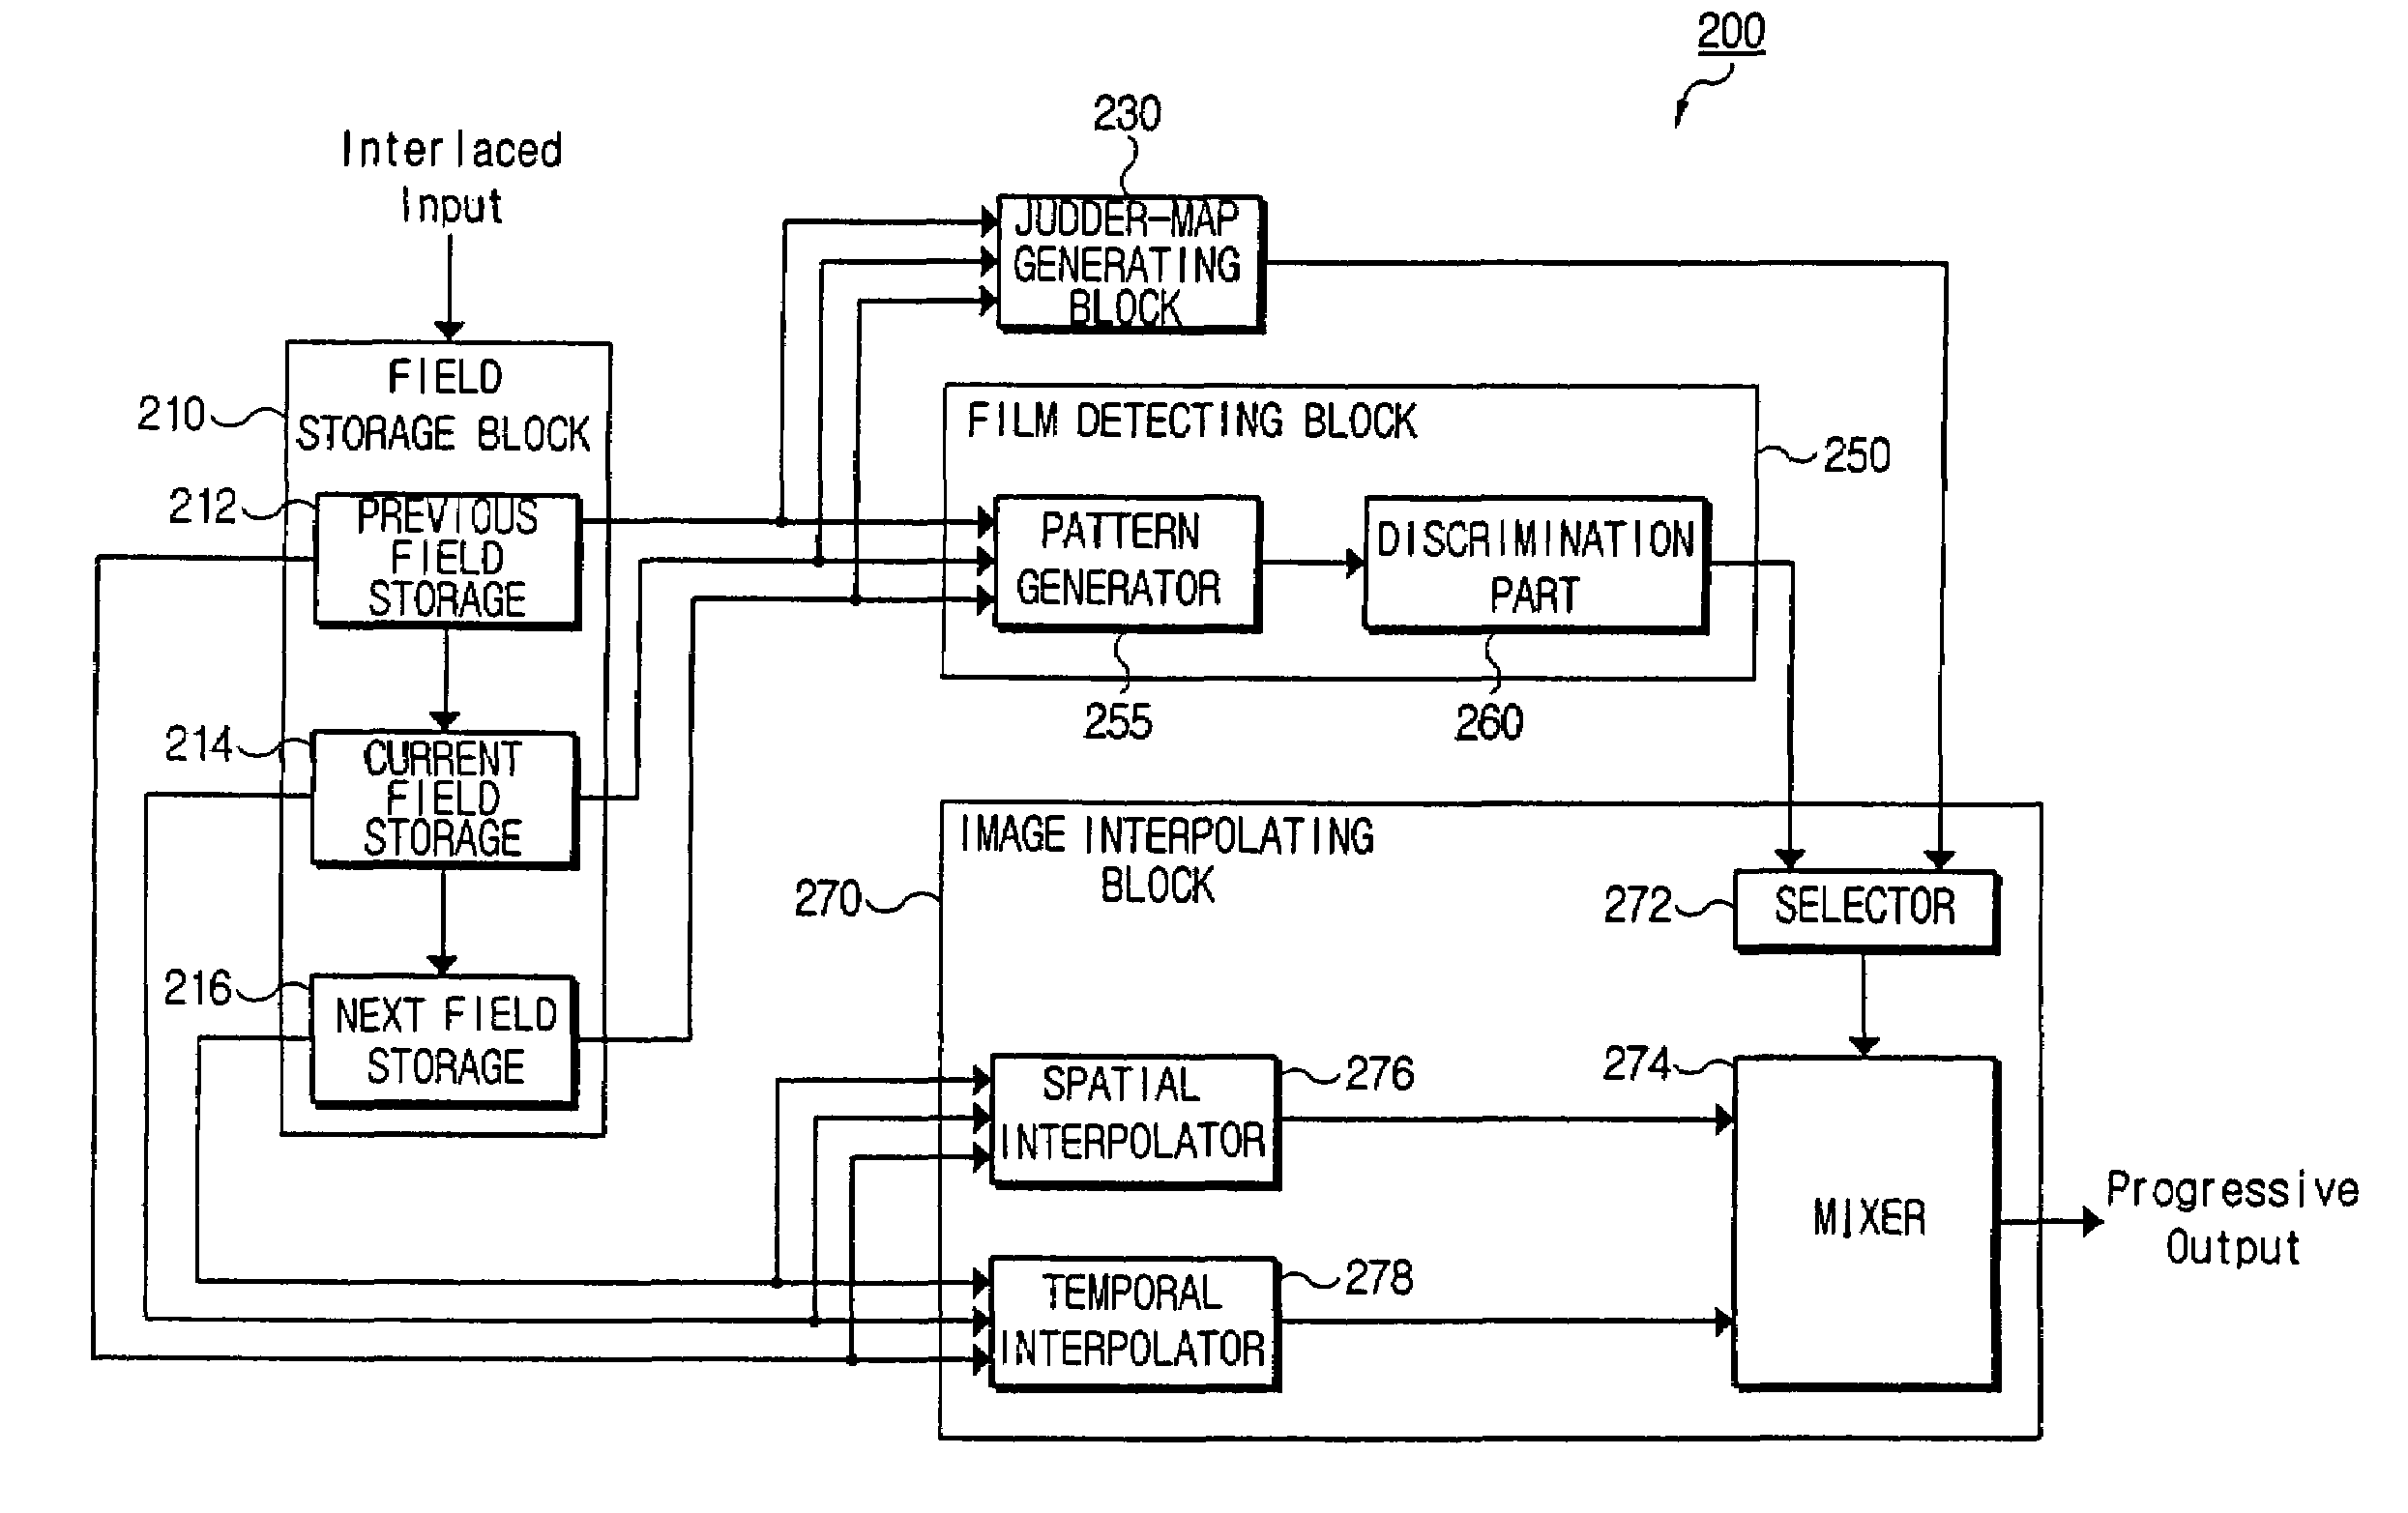 Image processing apparatus using judder-map and method thereof